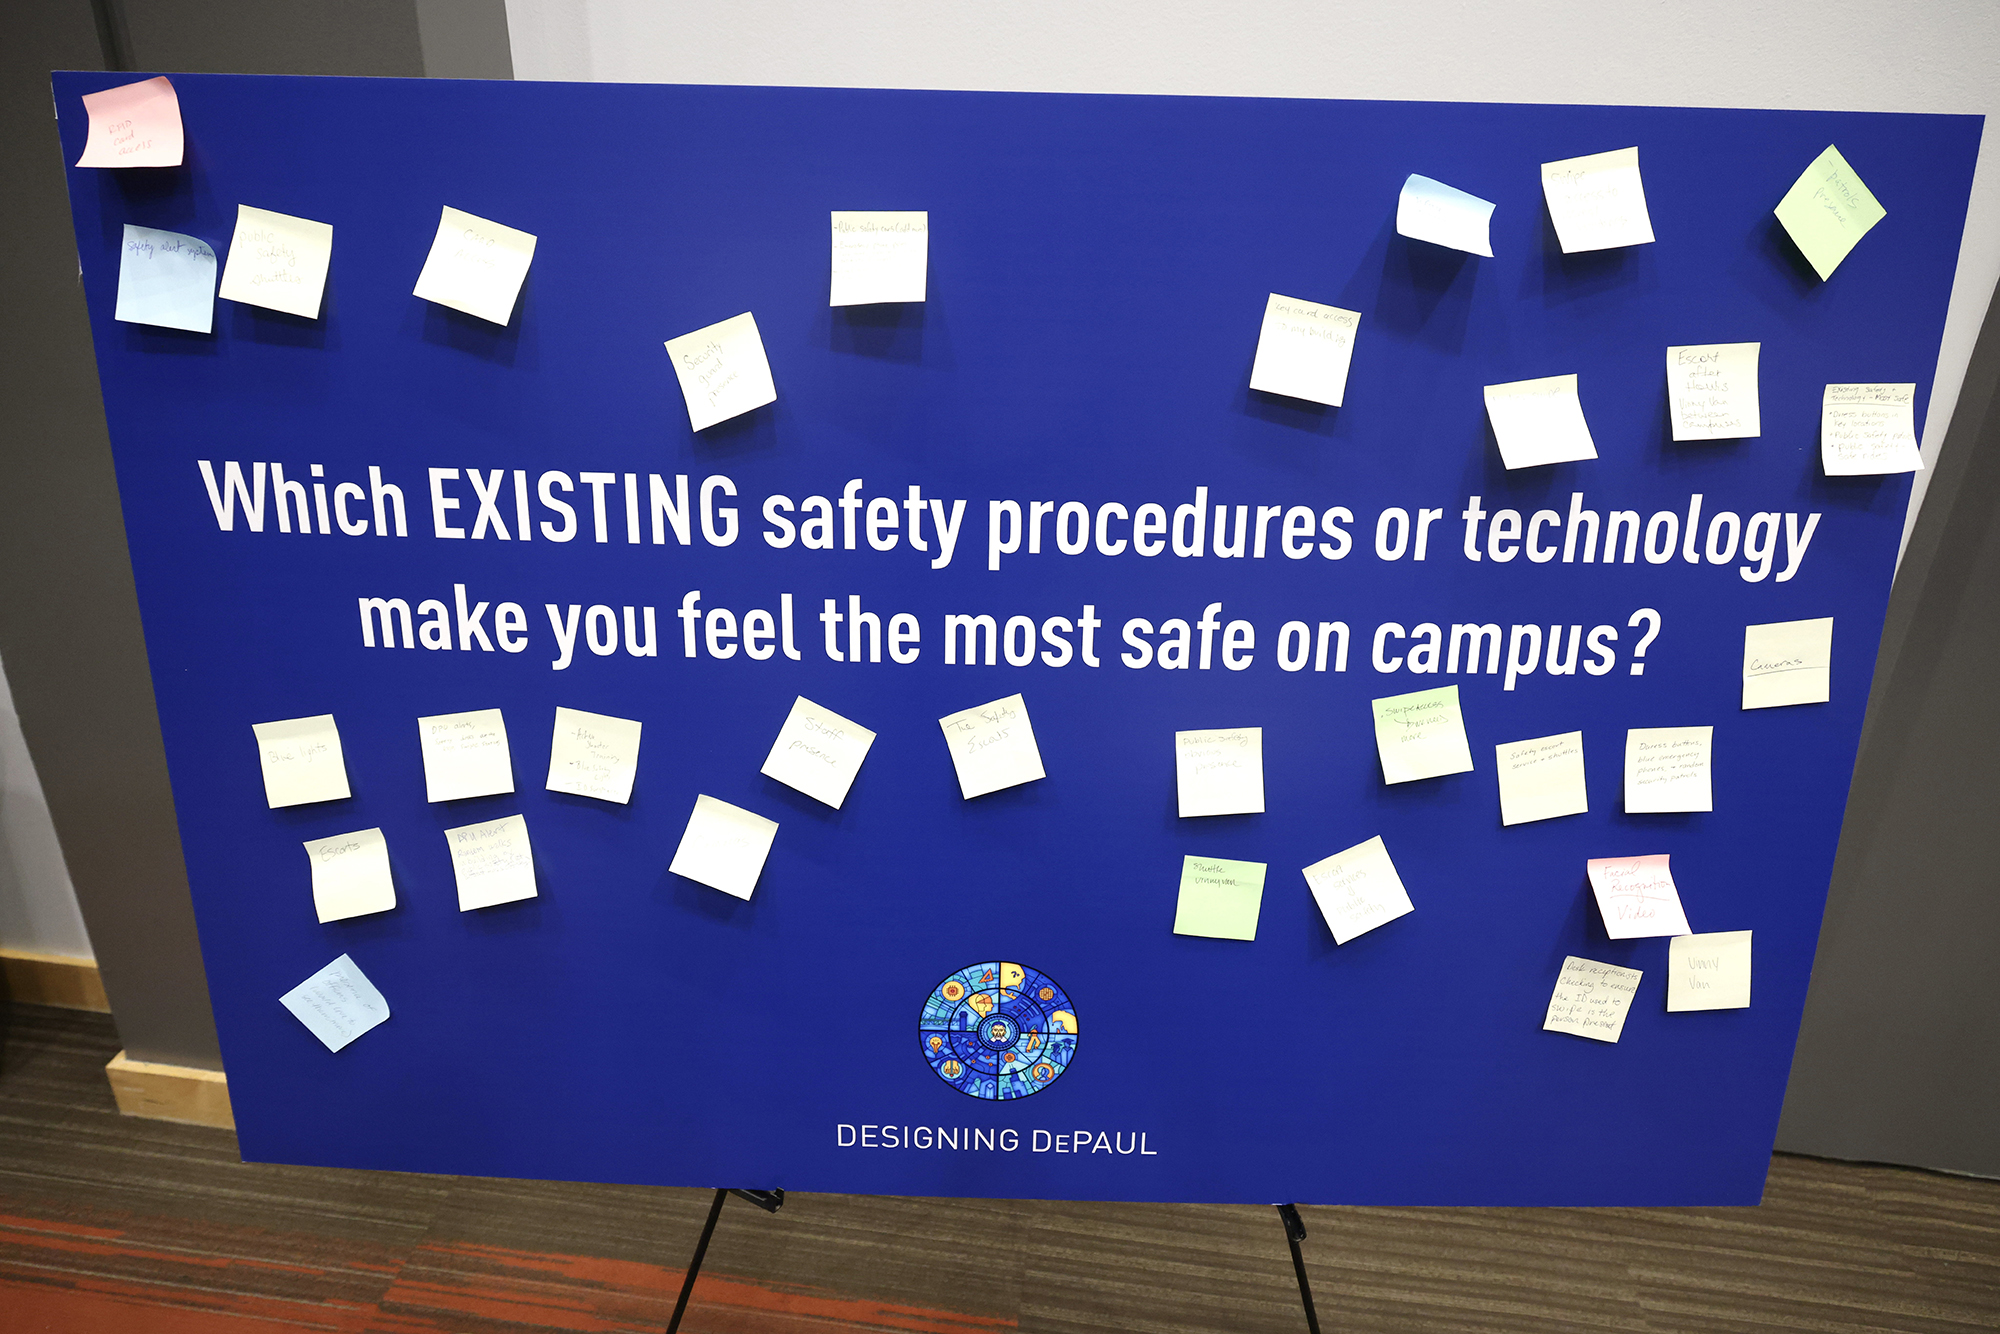 Sign reads: "Which existing safety procedures or technology make you feel most safe on campus?